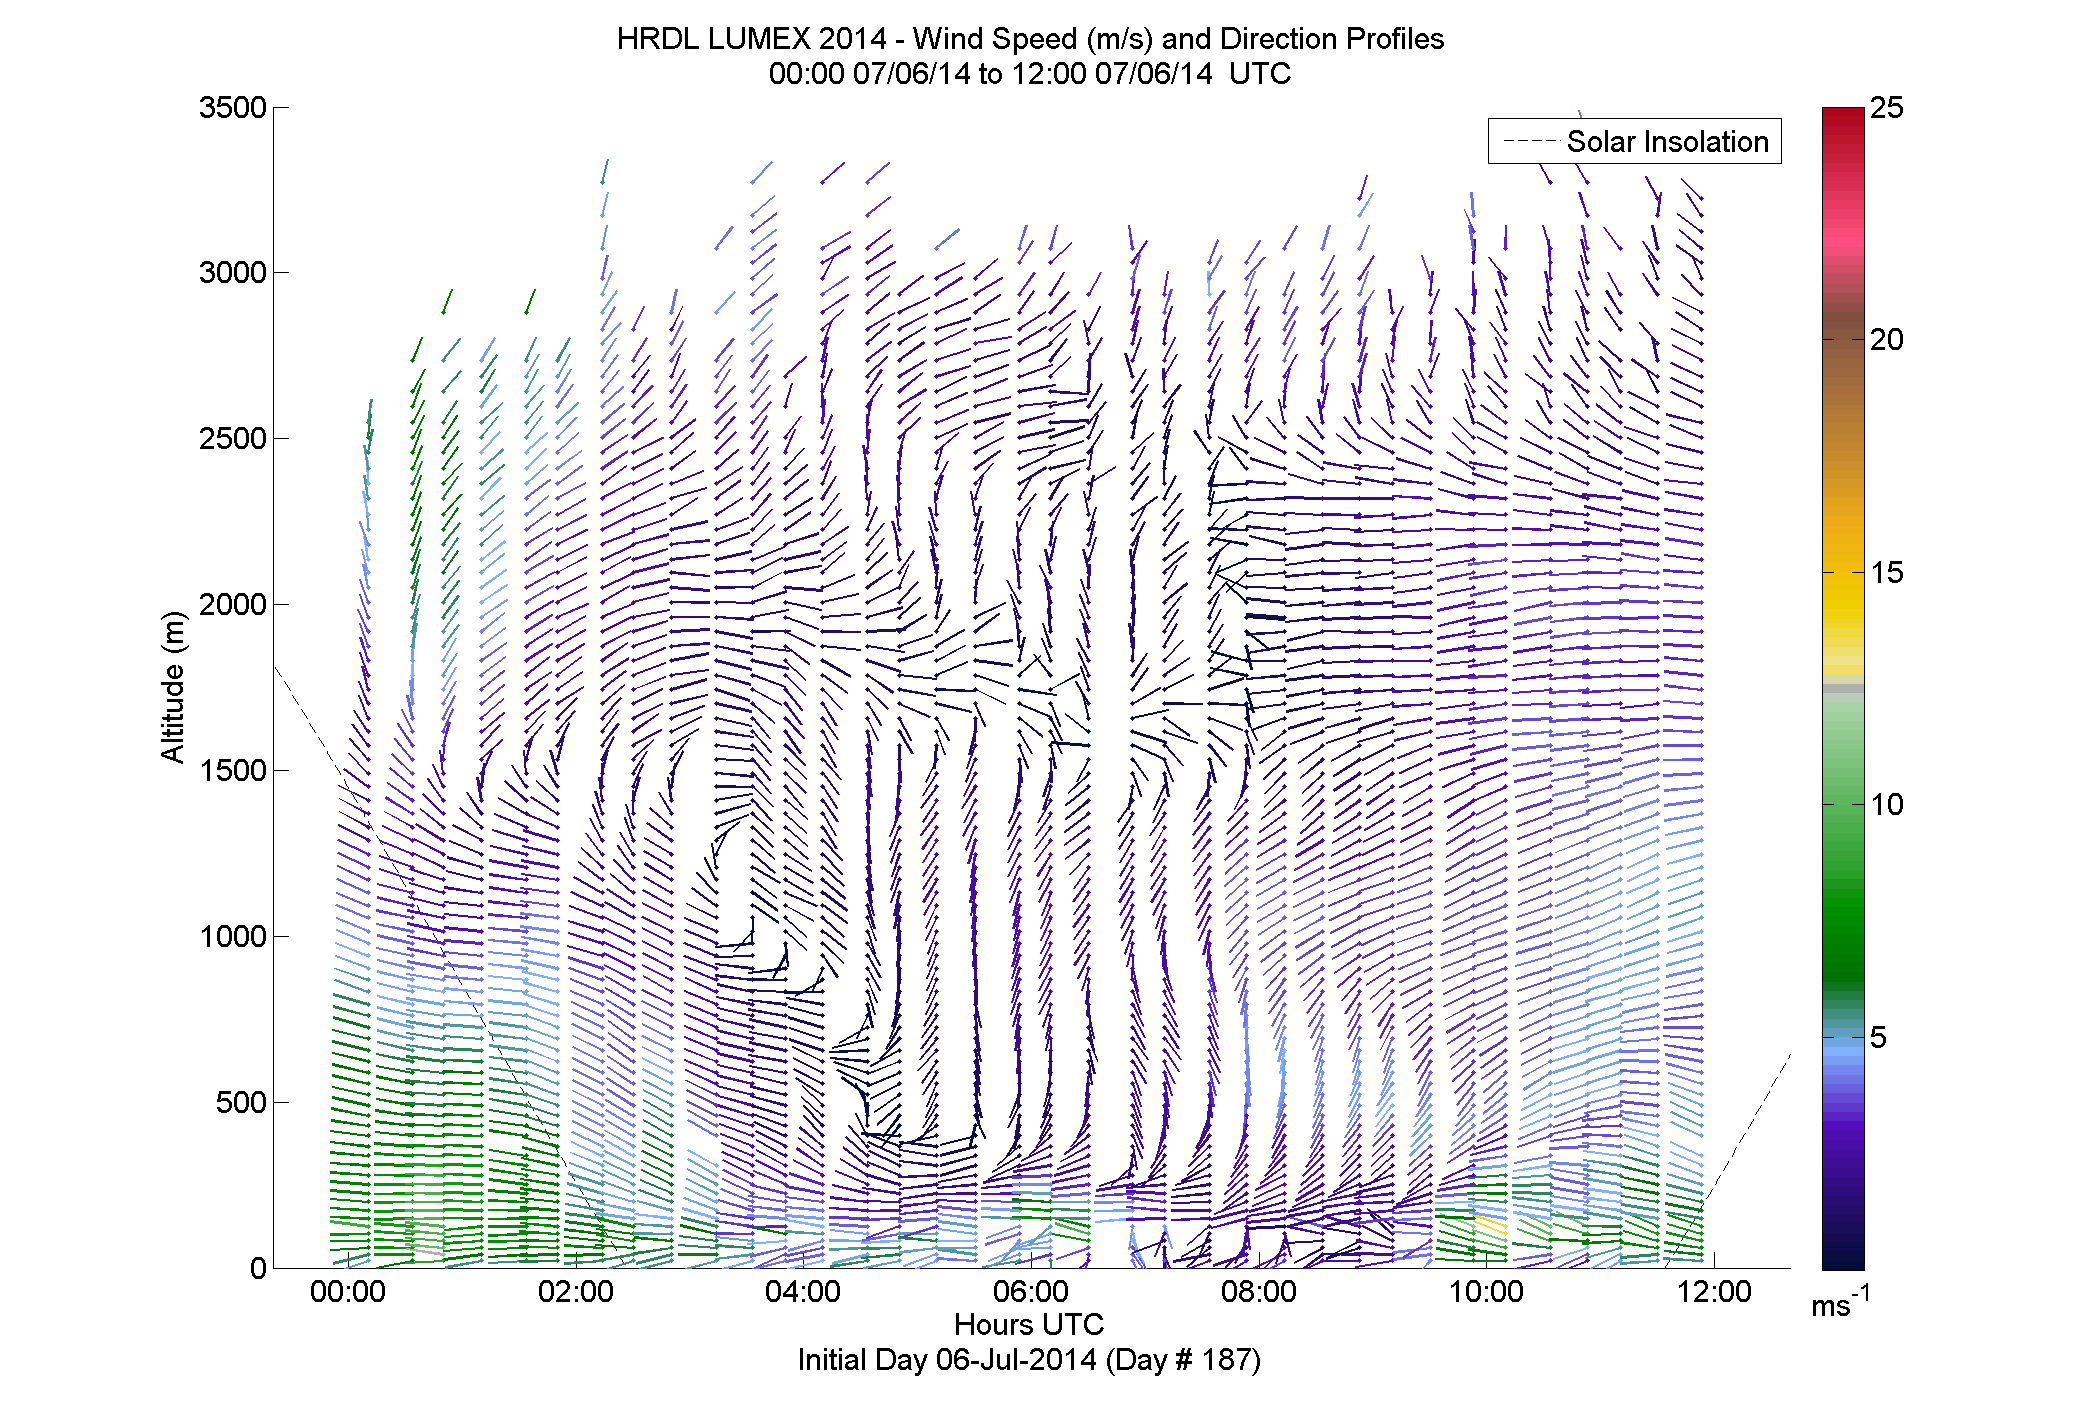 HRDL speed and direction profile - July 6 am